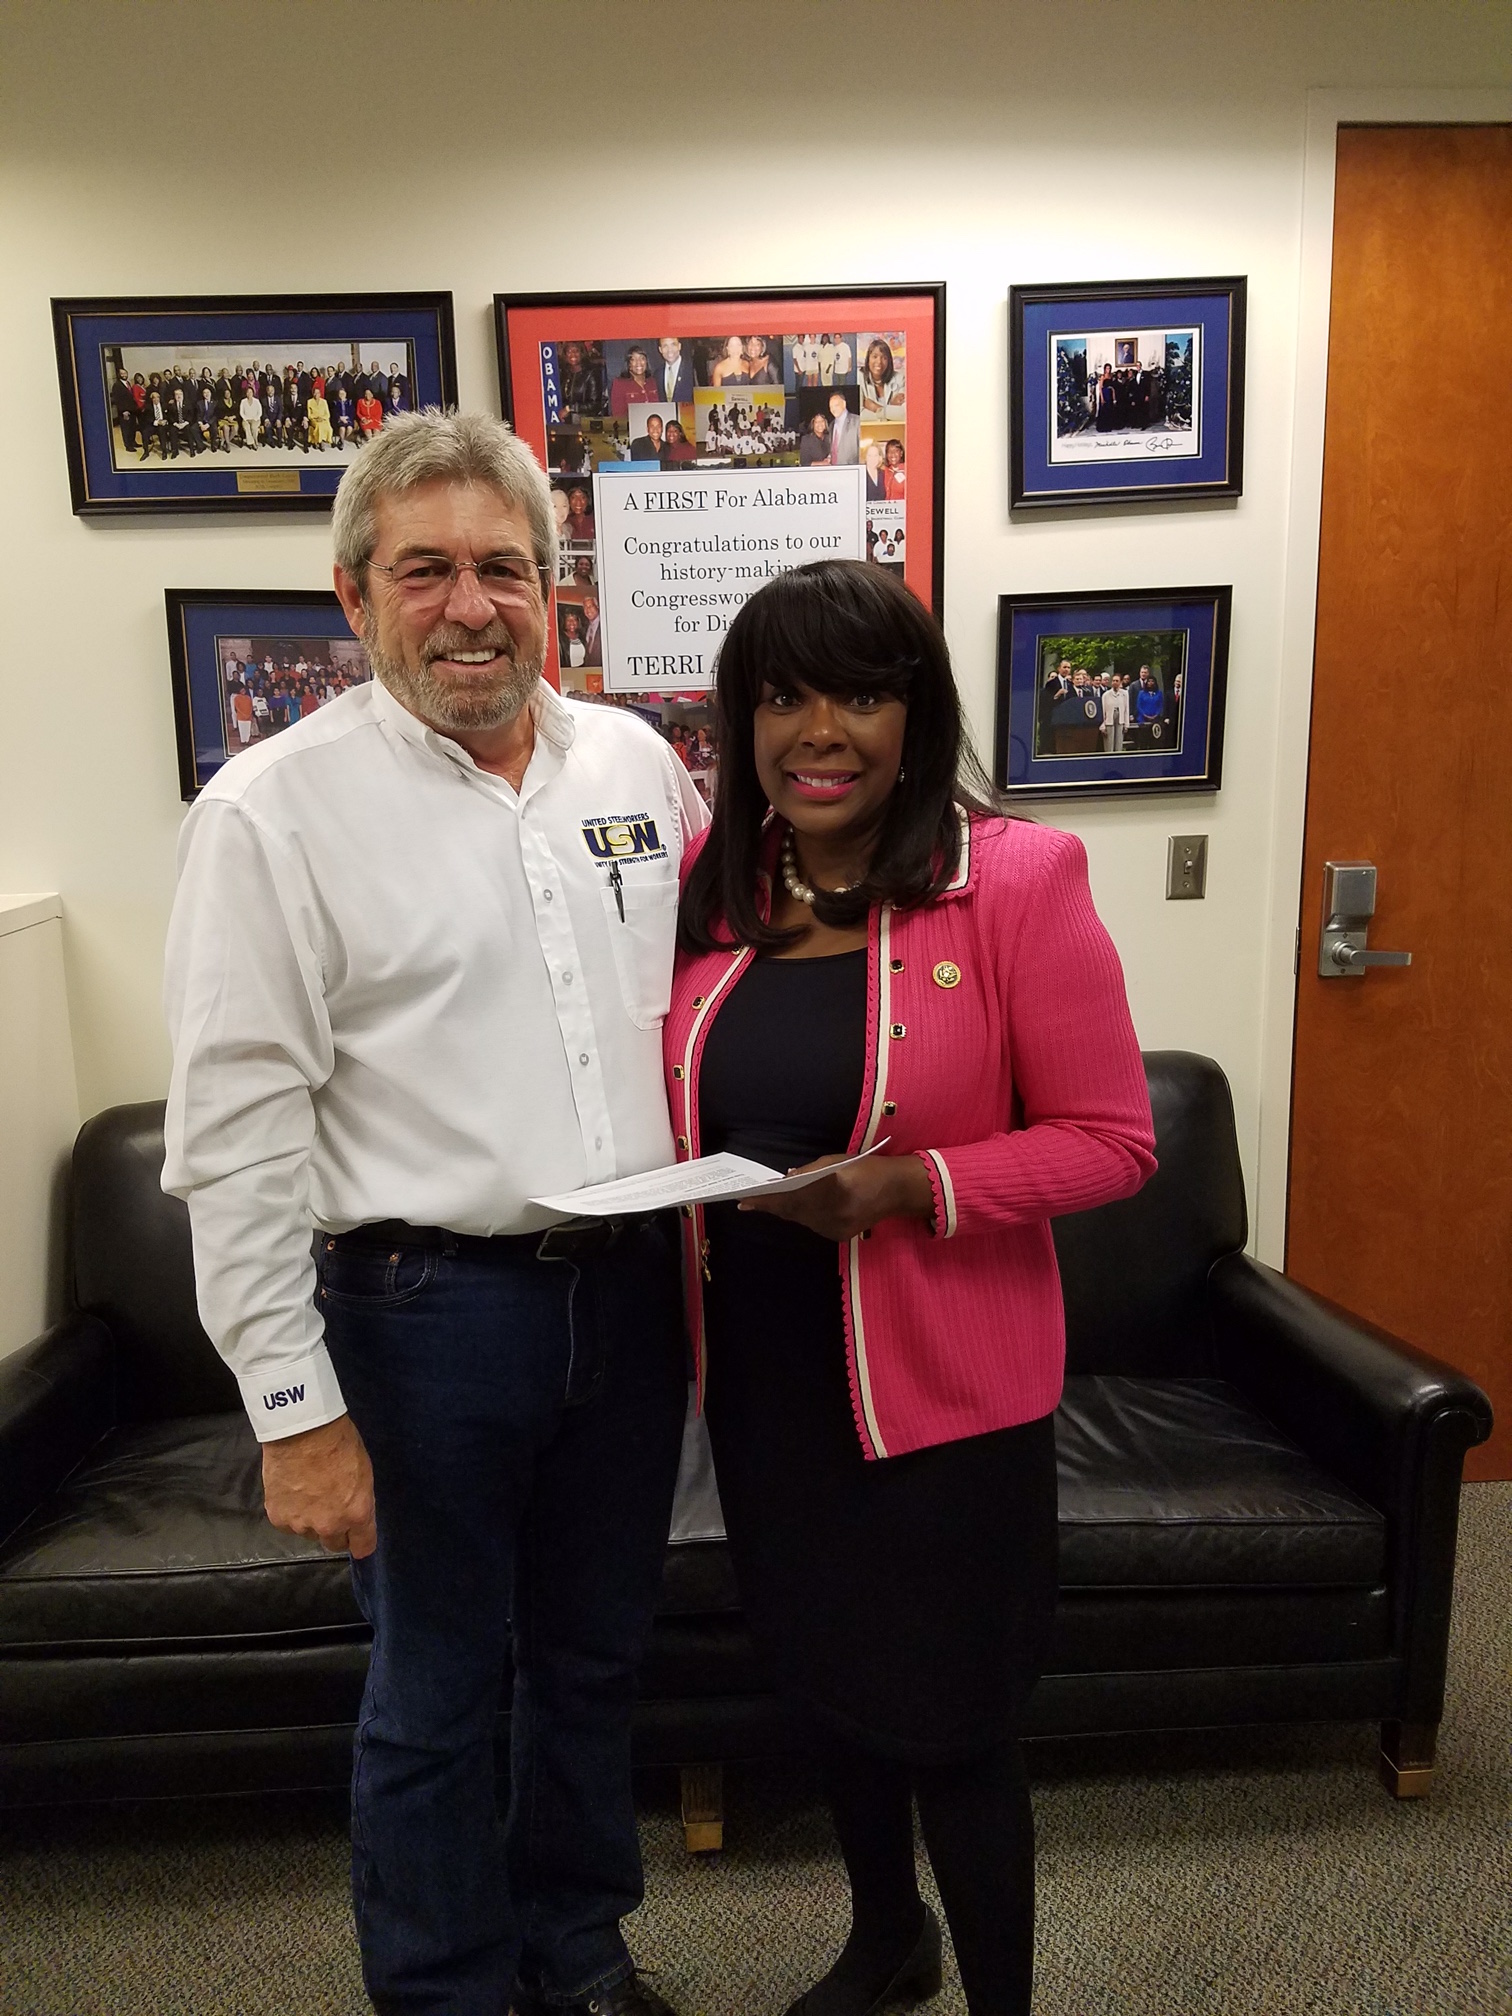 Rich Youngblood and Rep. Terri Sewell